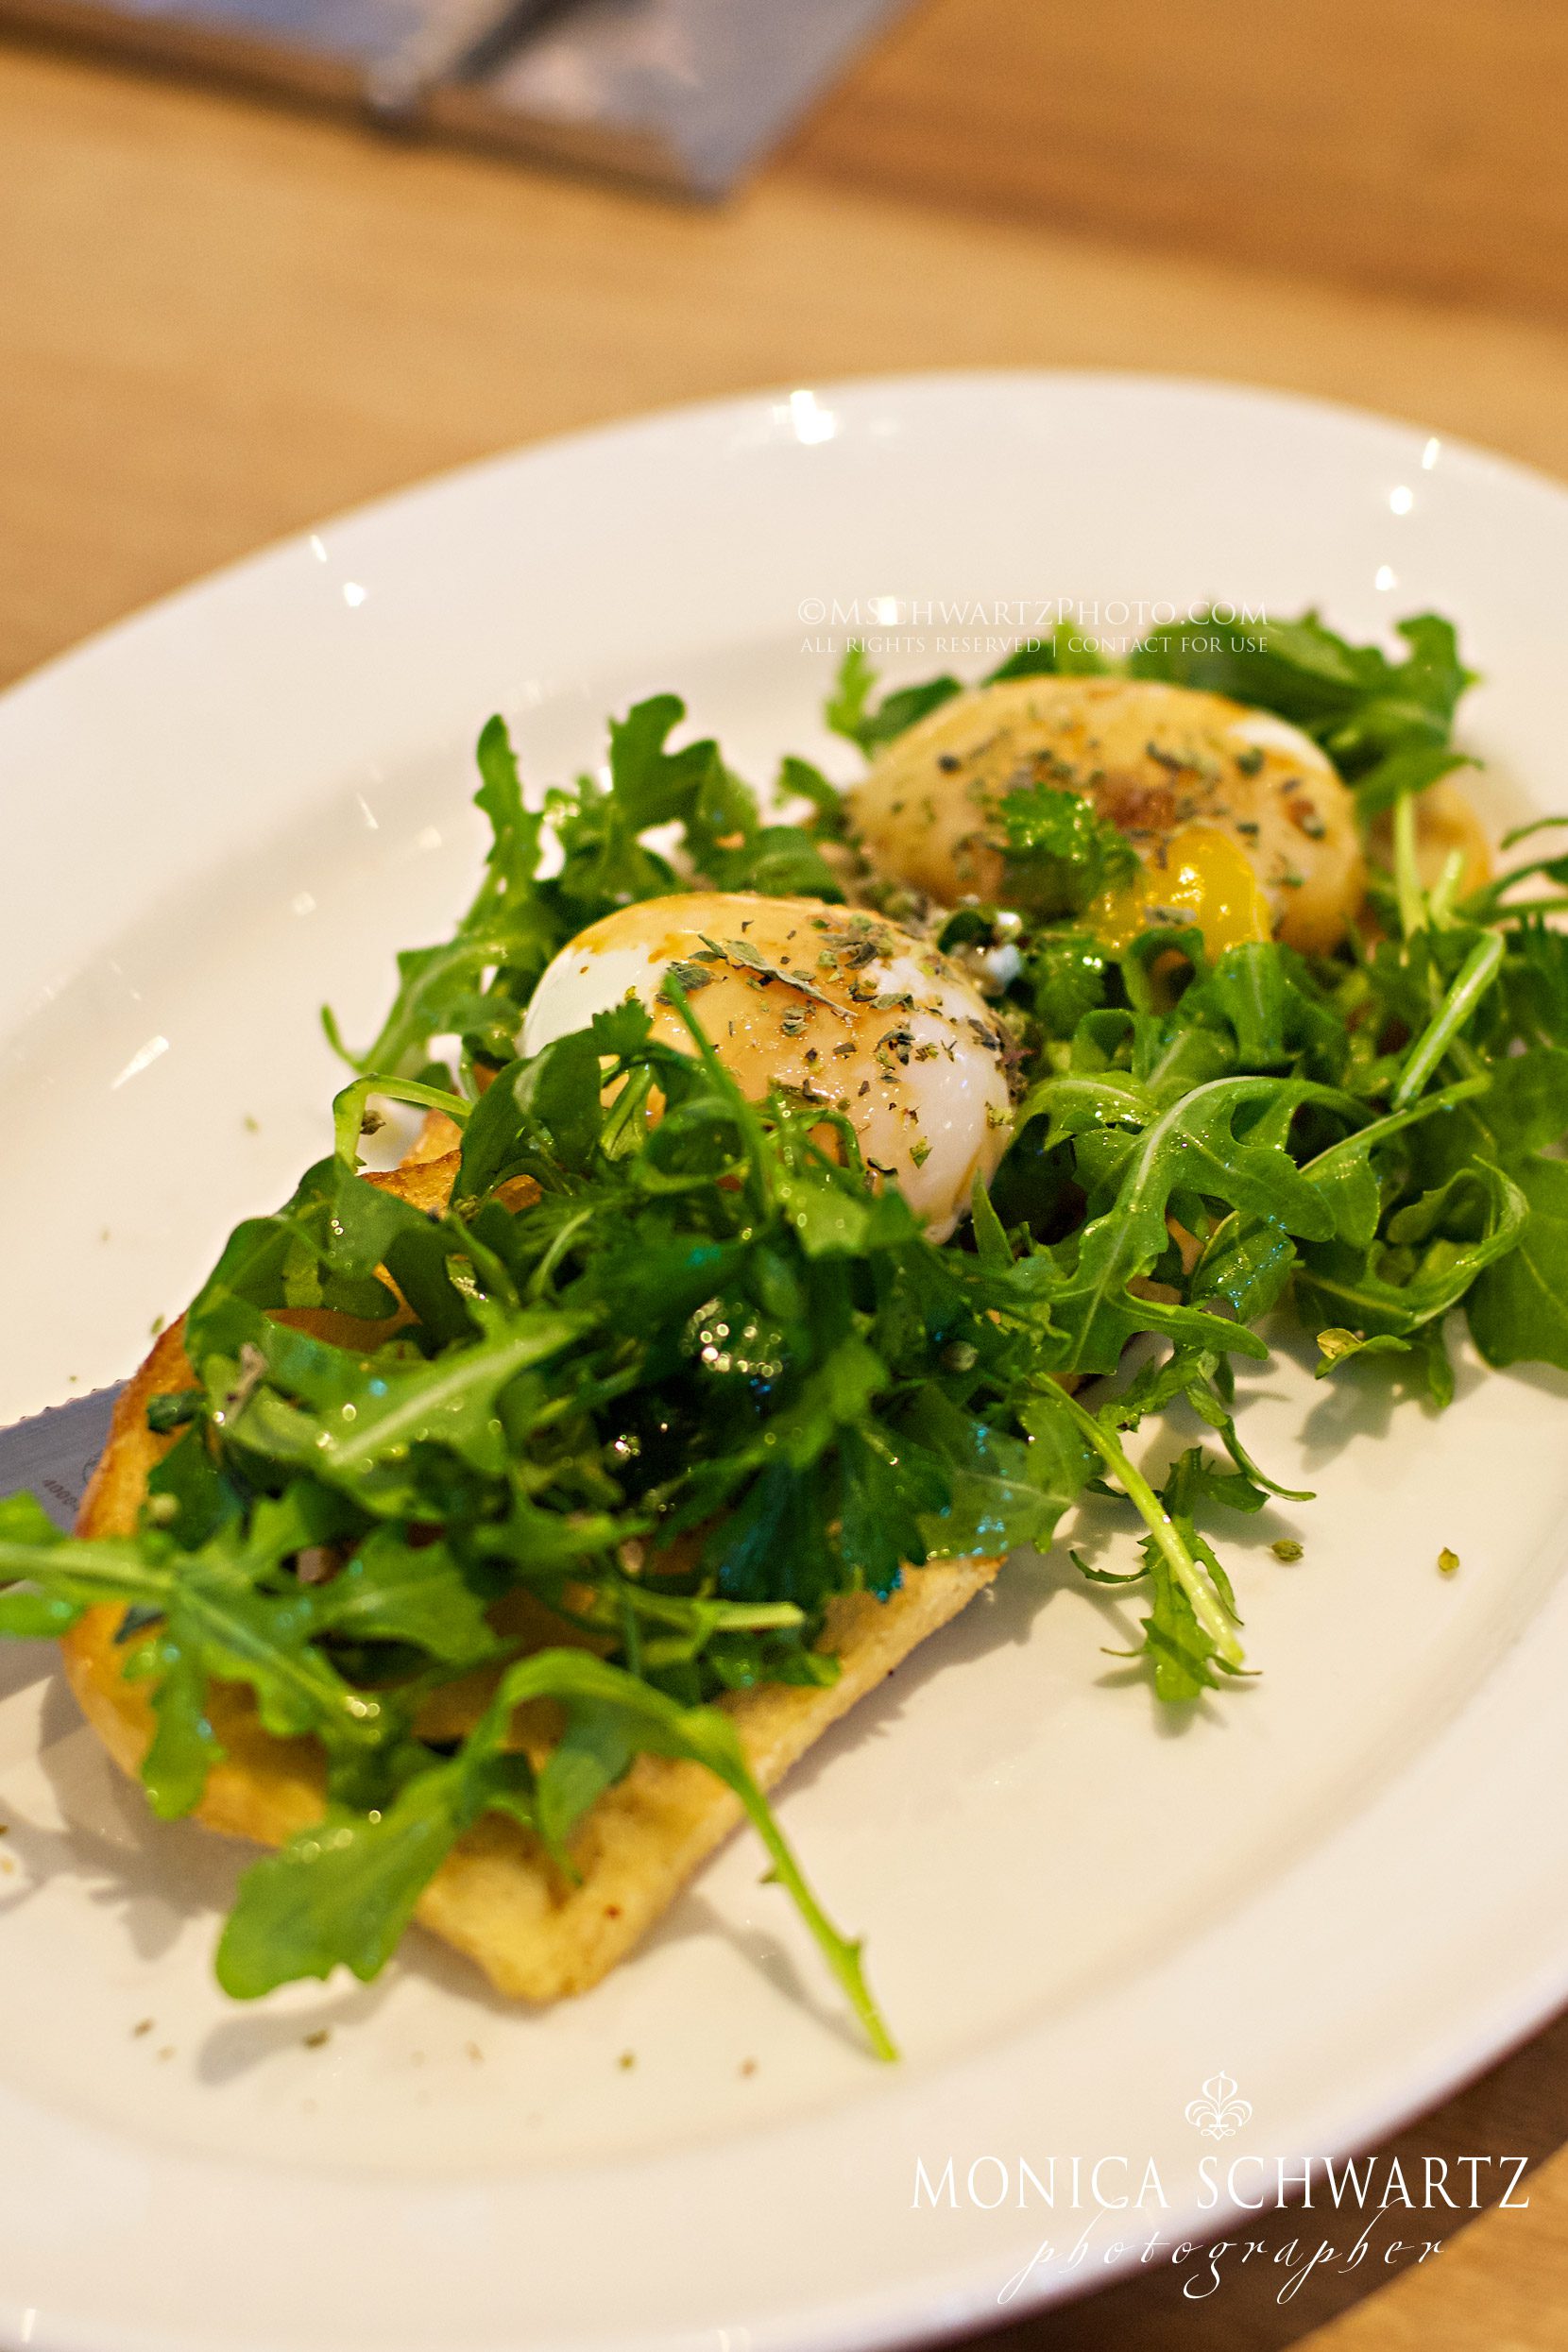 Poached-eggs-with-Arugula-and-dried-oregano-on-Levain-toast-at-the-Shed-in-Healdsburg-California